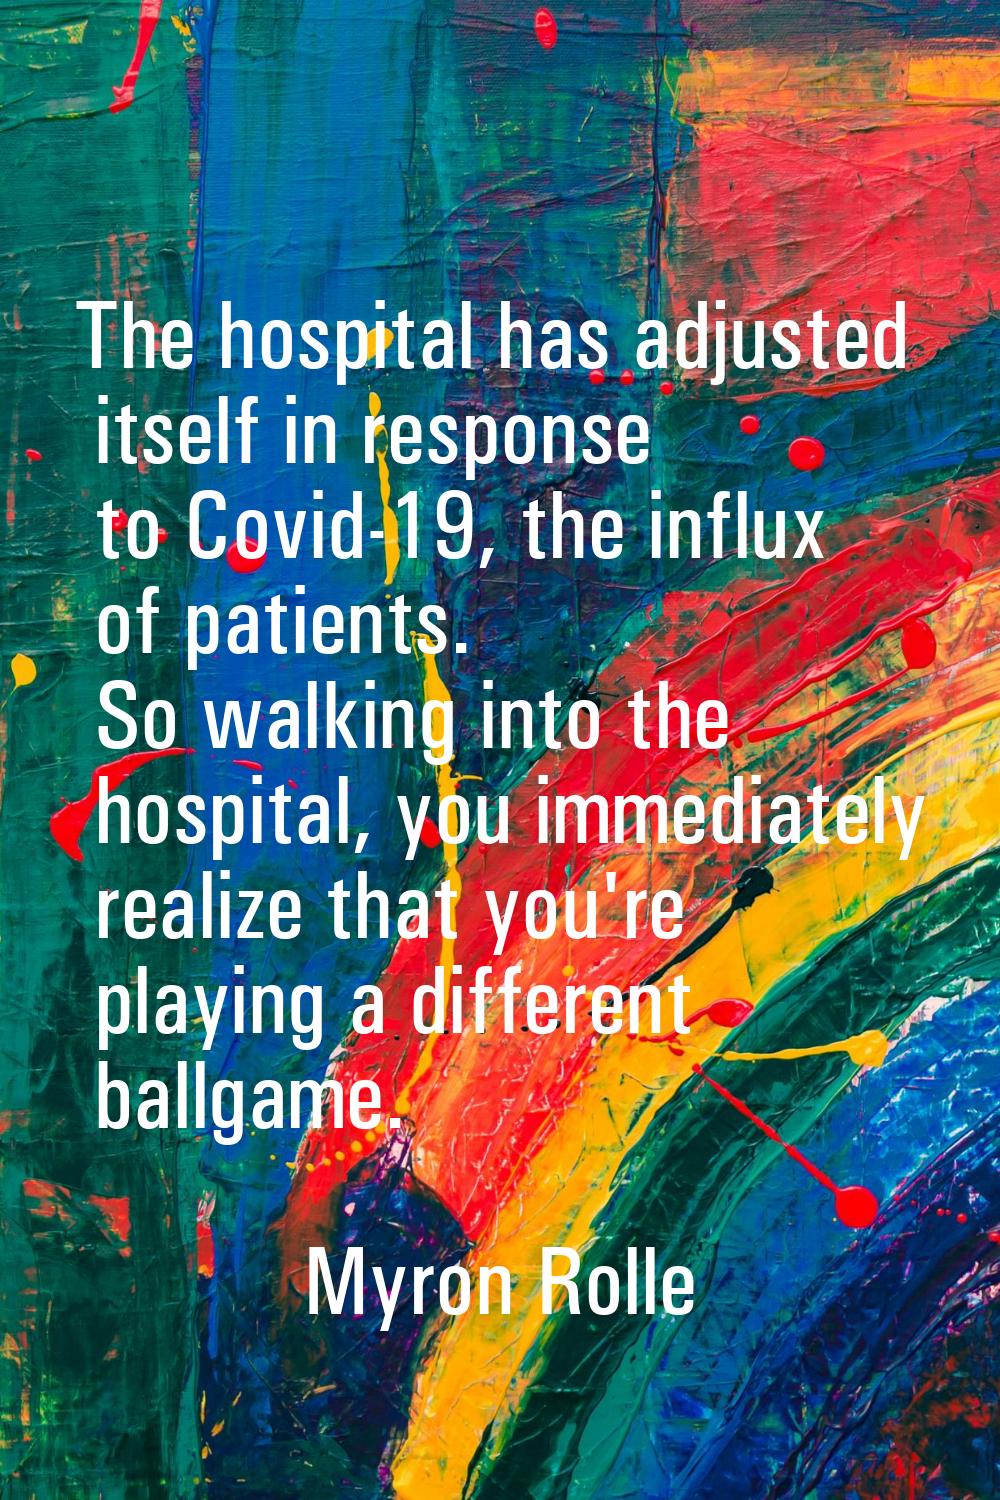 The hospital has adjusted itself in response to Covid-19, the influx of patients. So walking into t